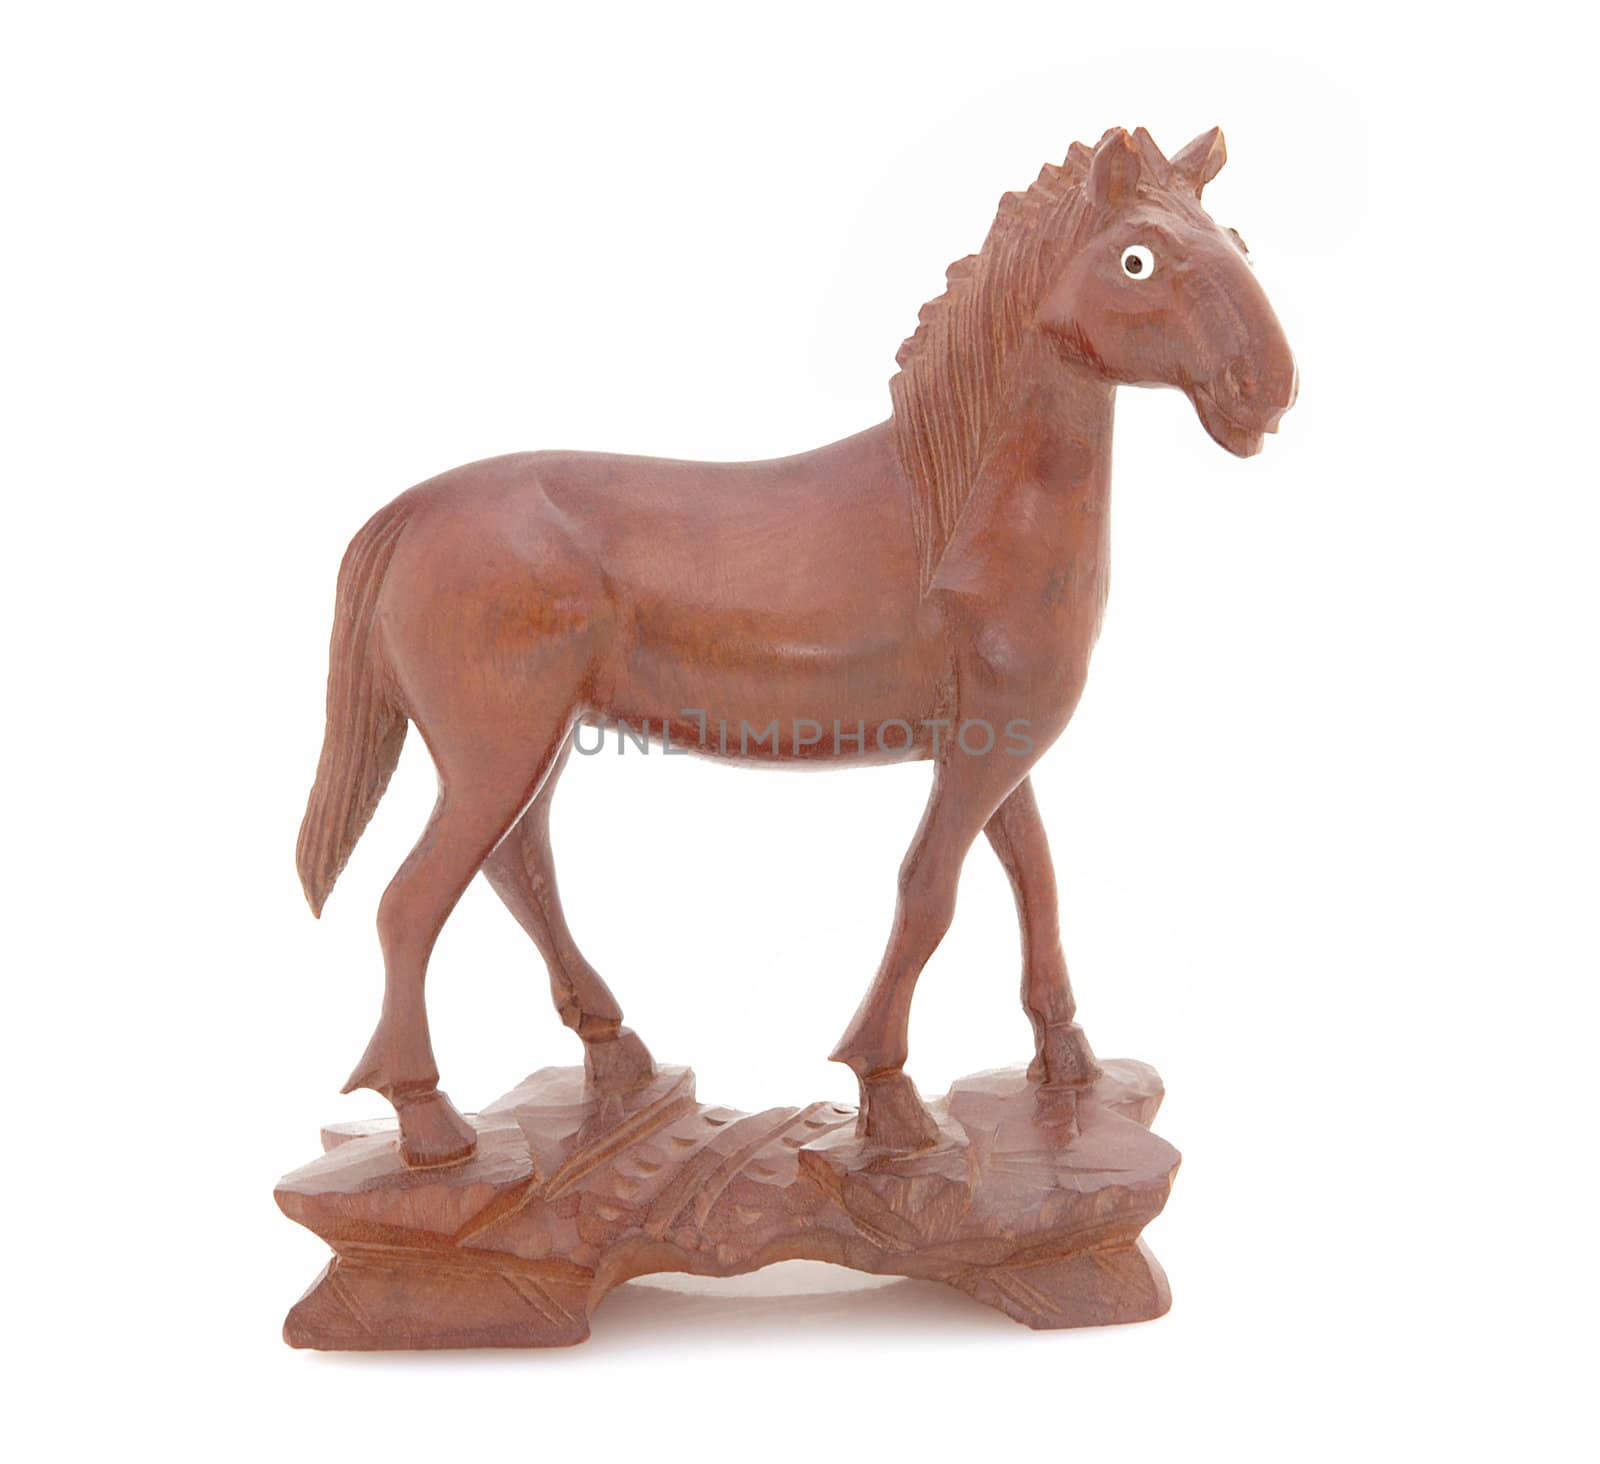 Antique Wooden Statue of a Horse by griffre